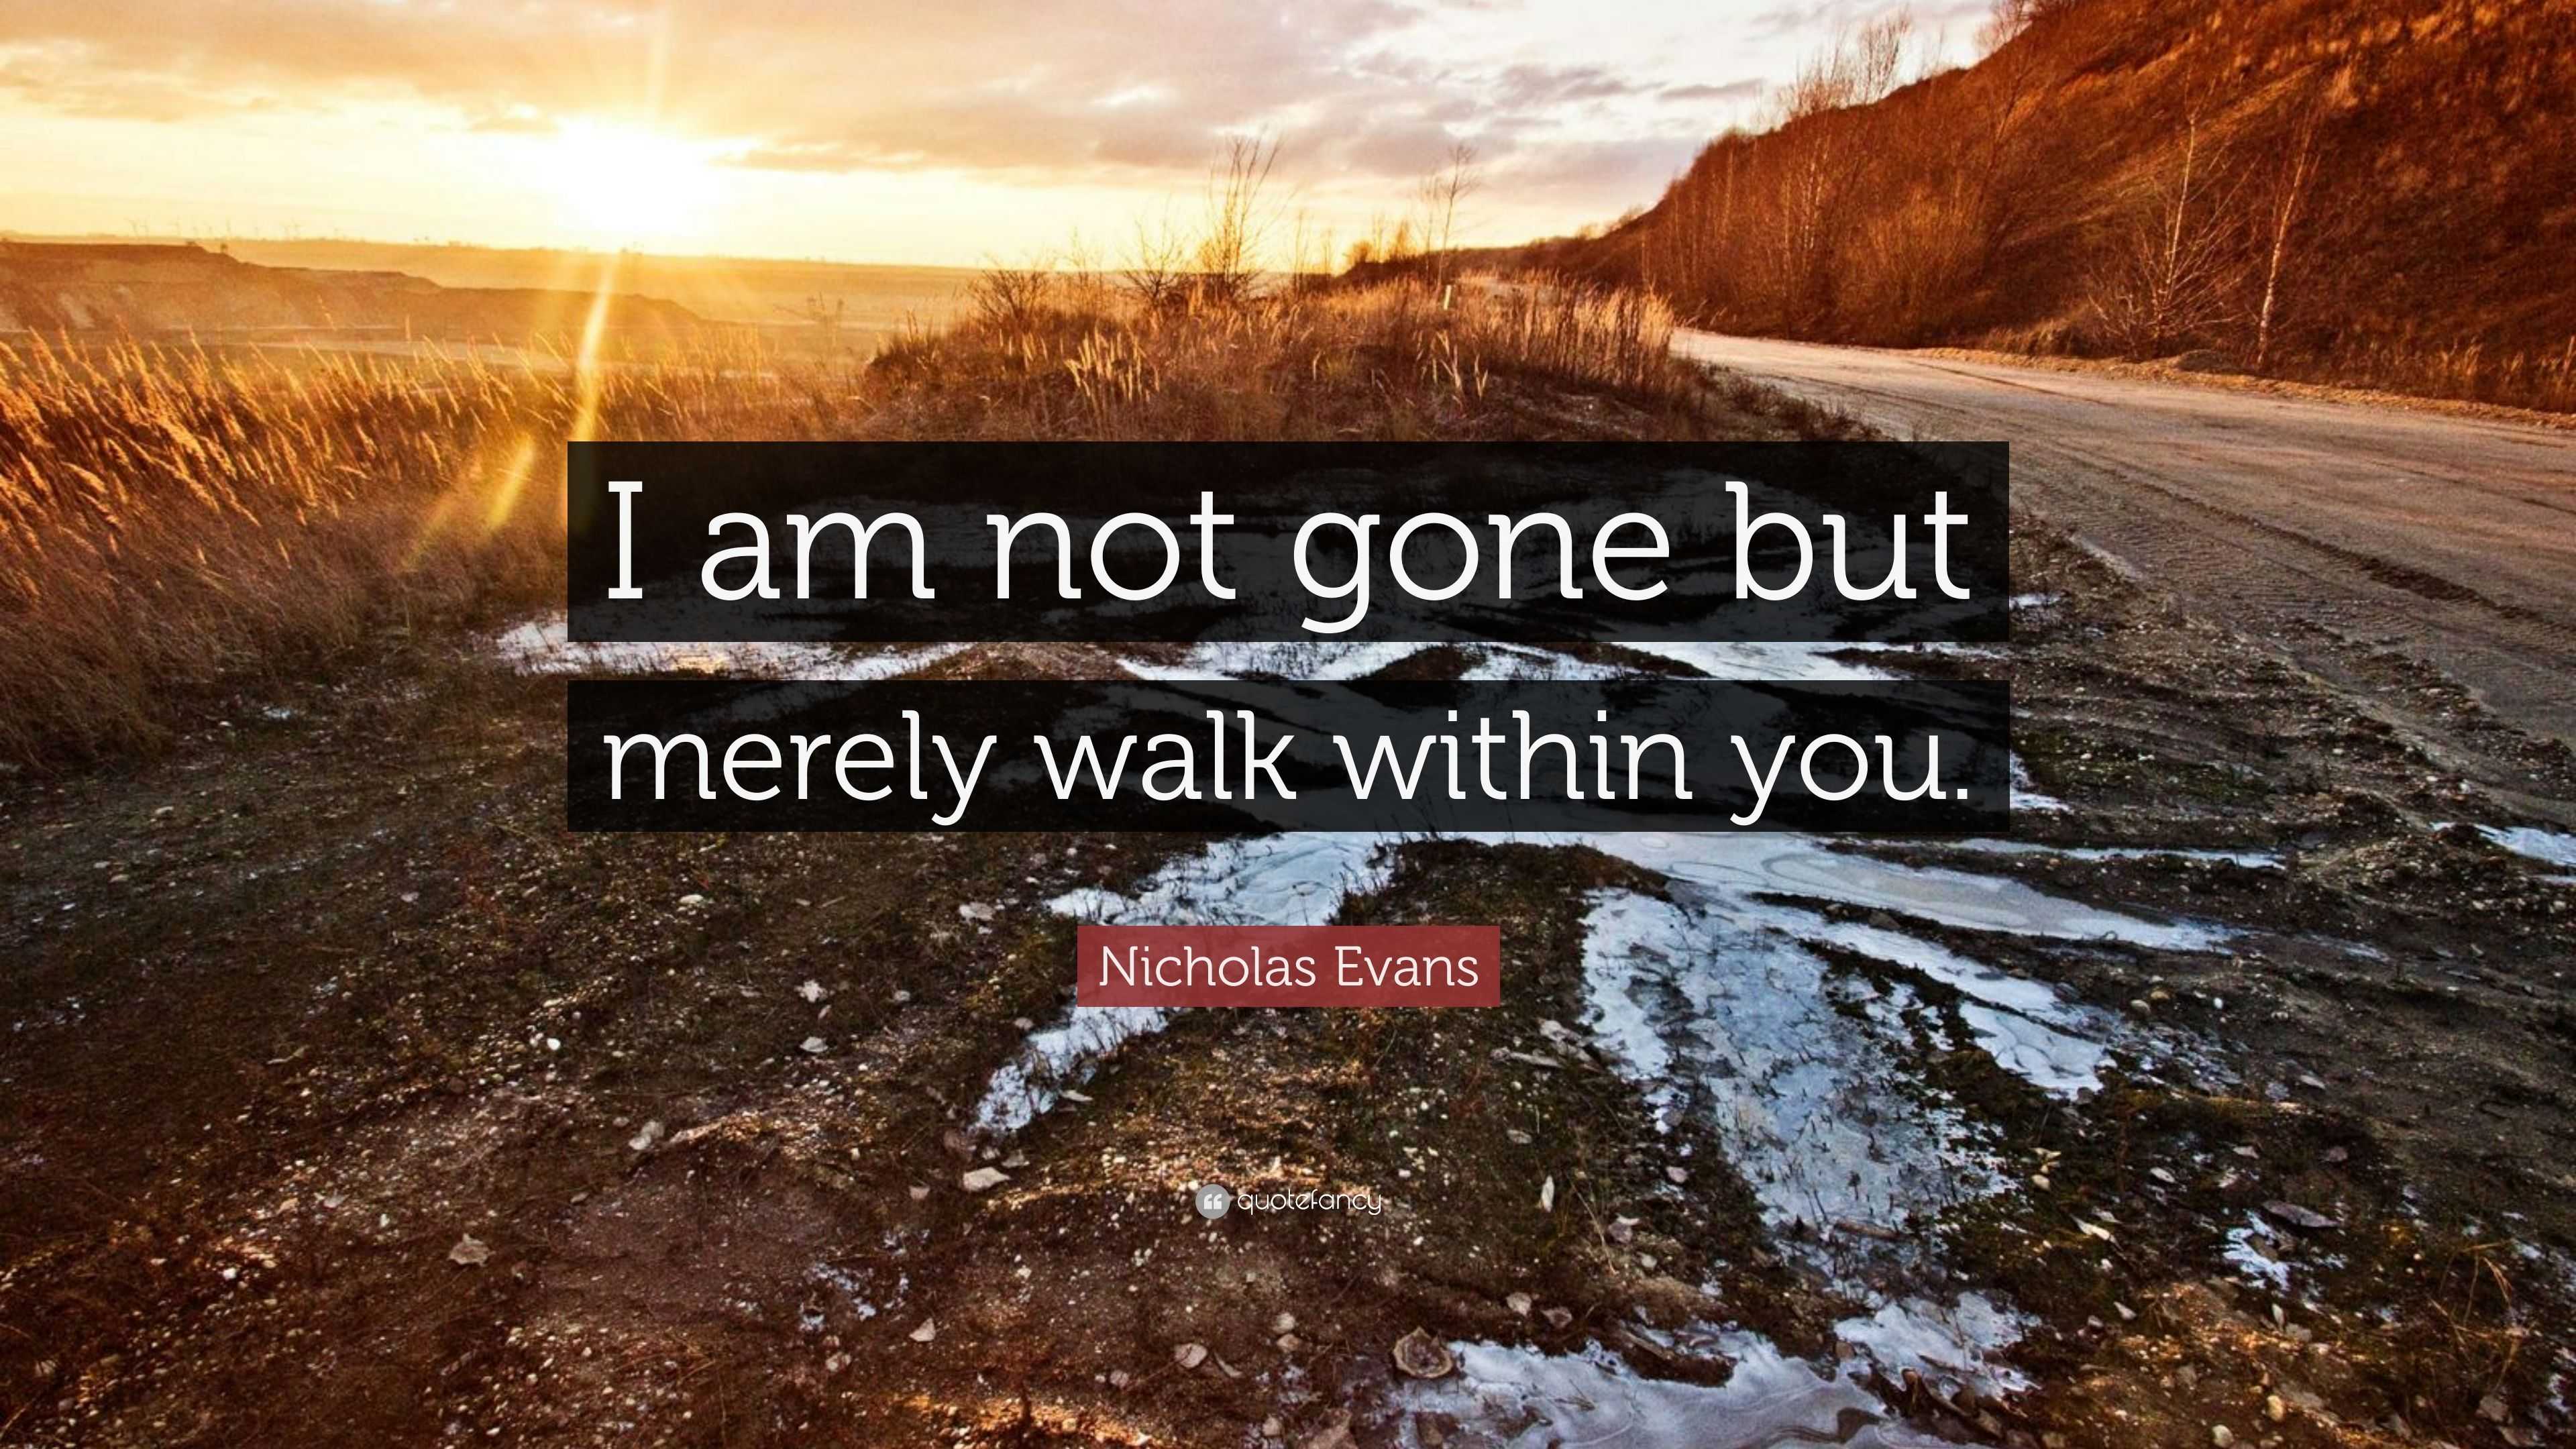 Nicholas Evans Quote: “I am not gone but merely walk within you.”